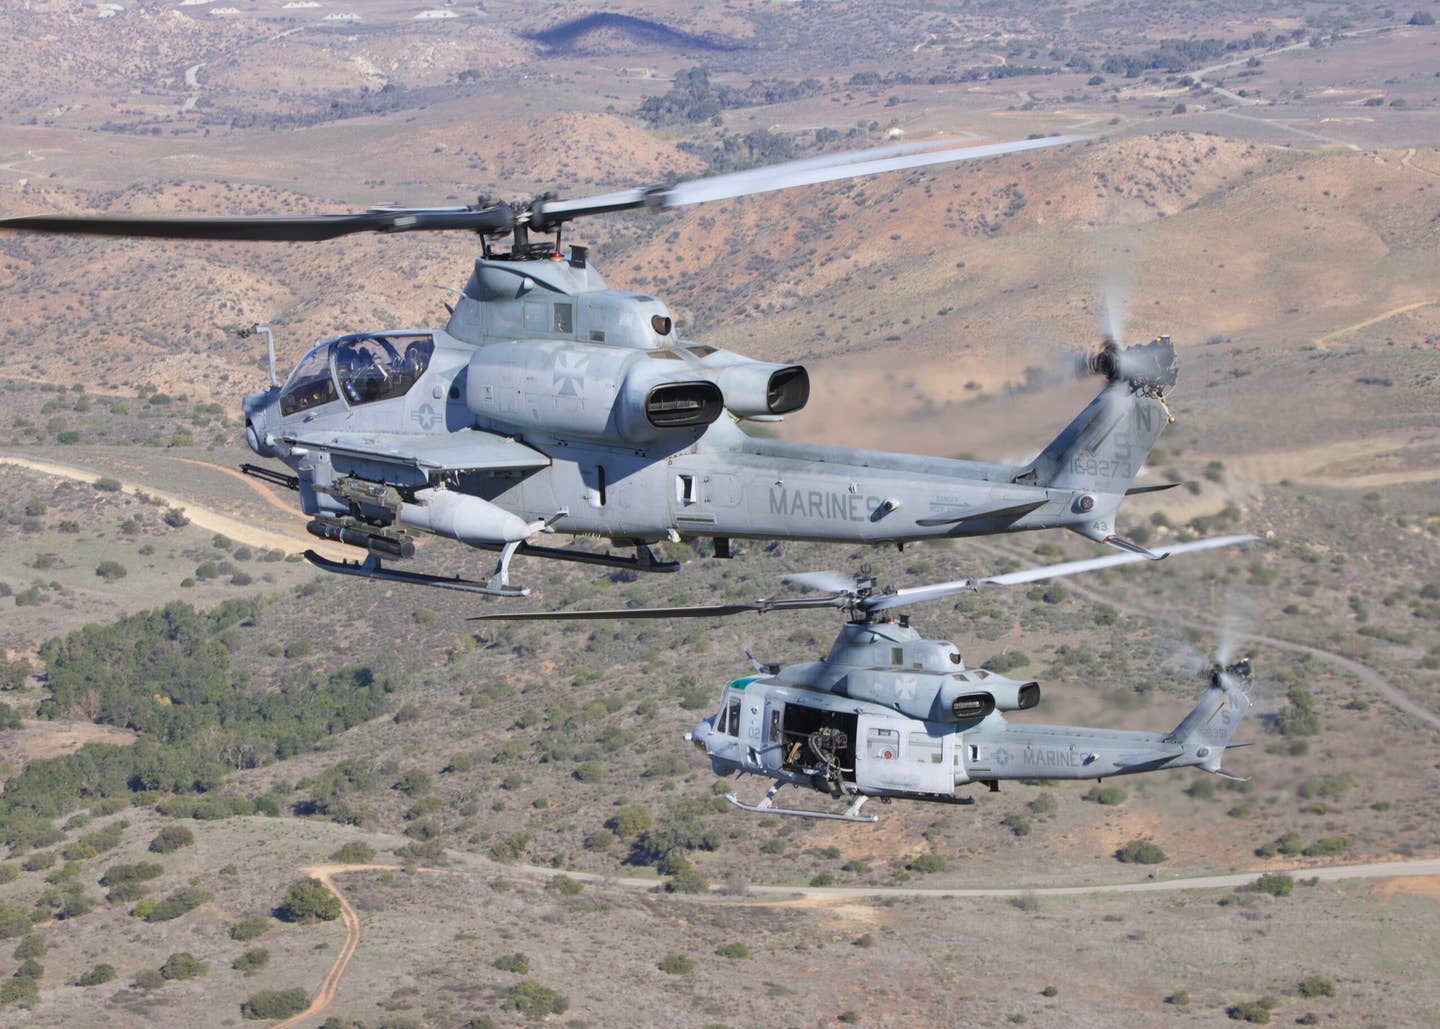 AH-1Z and UH-1Y side-by-side on a training mission. (Author)